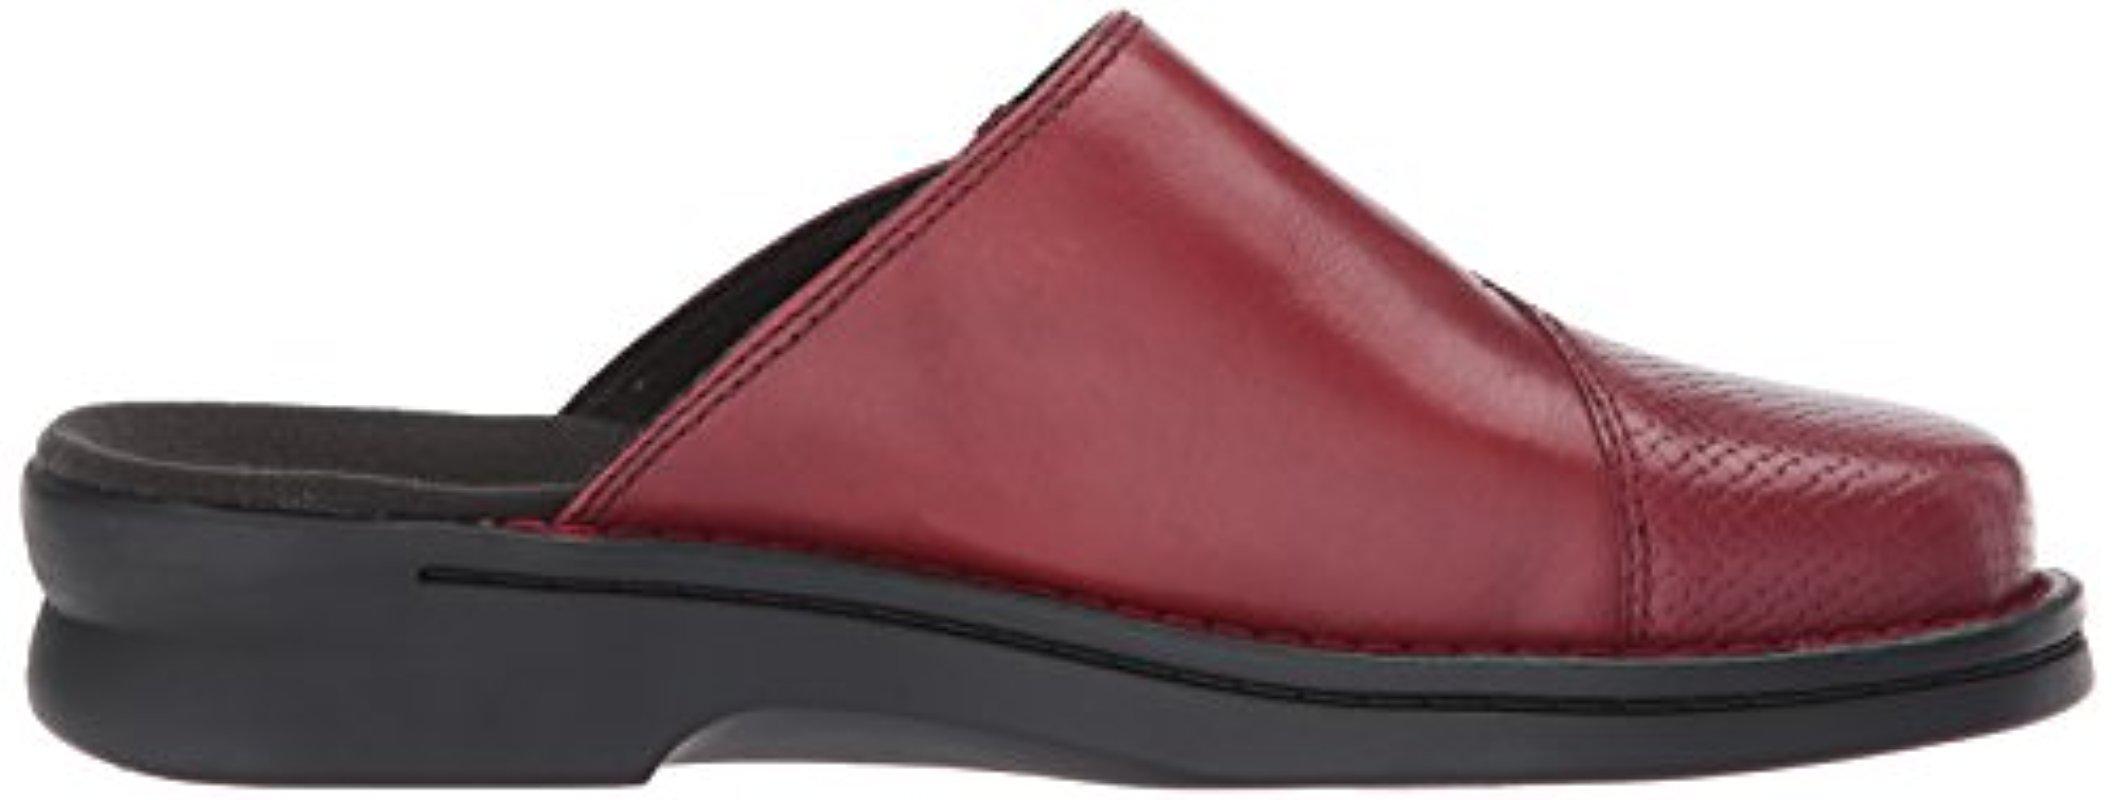 Clarks Leather S Patty Tayna in Red 